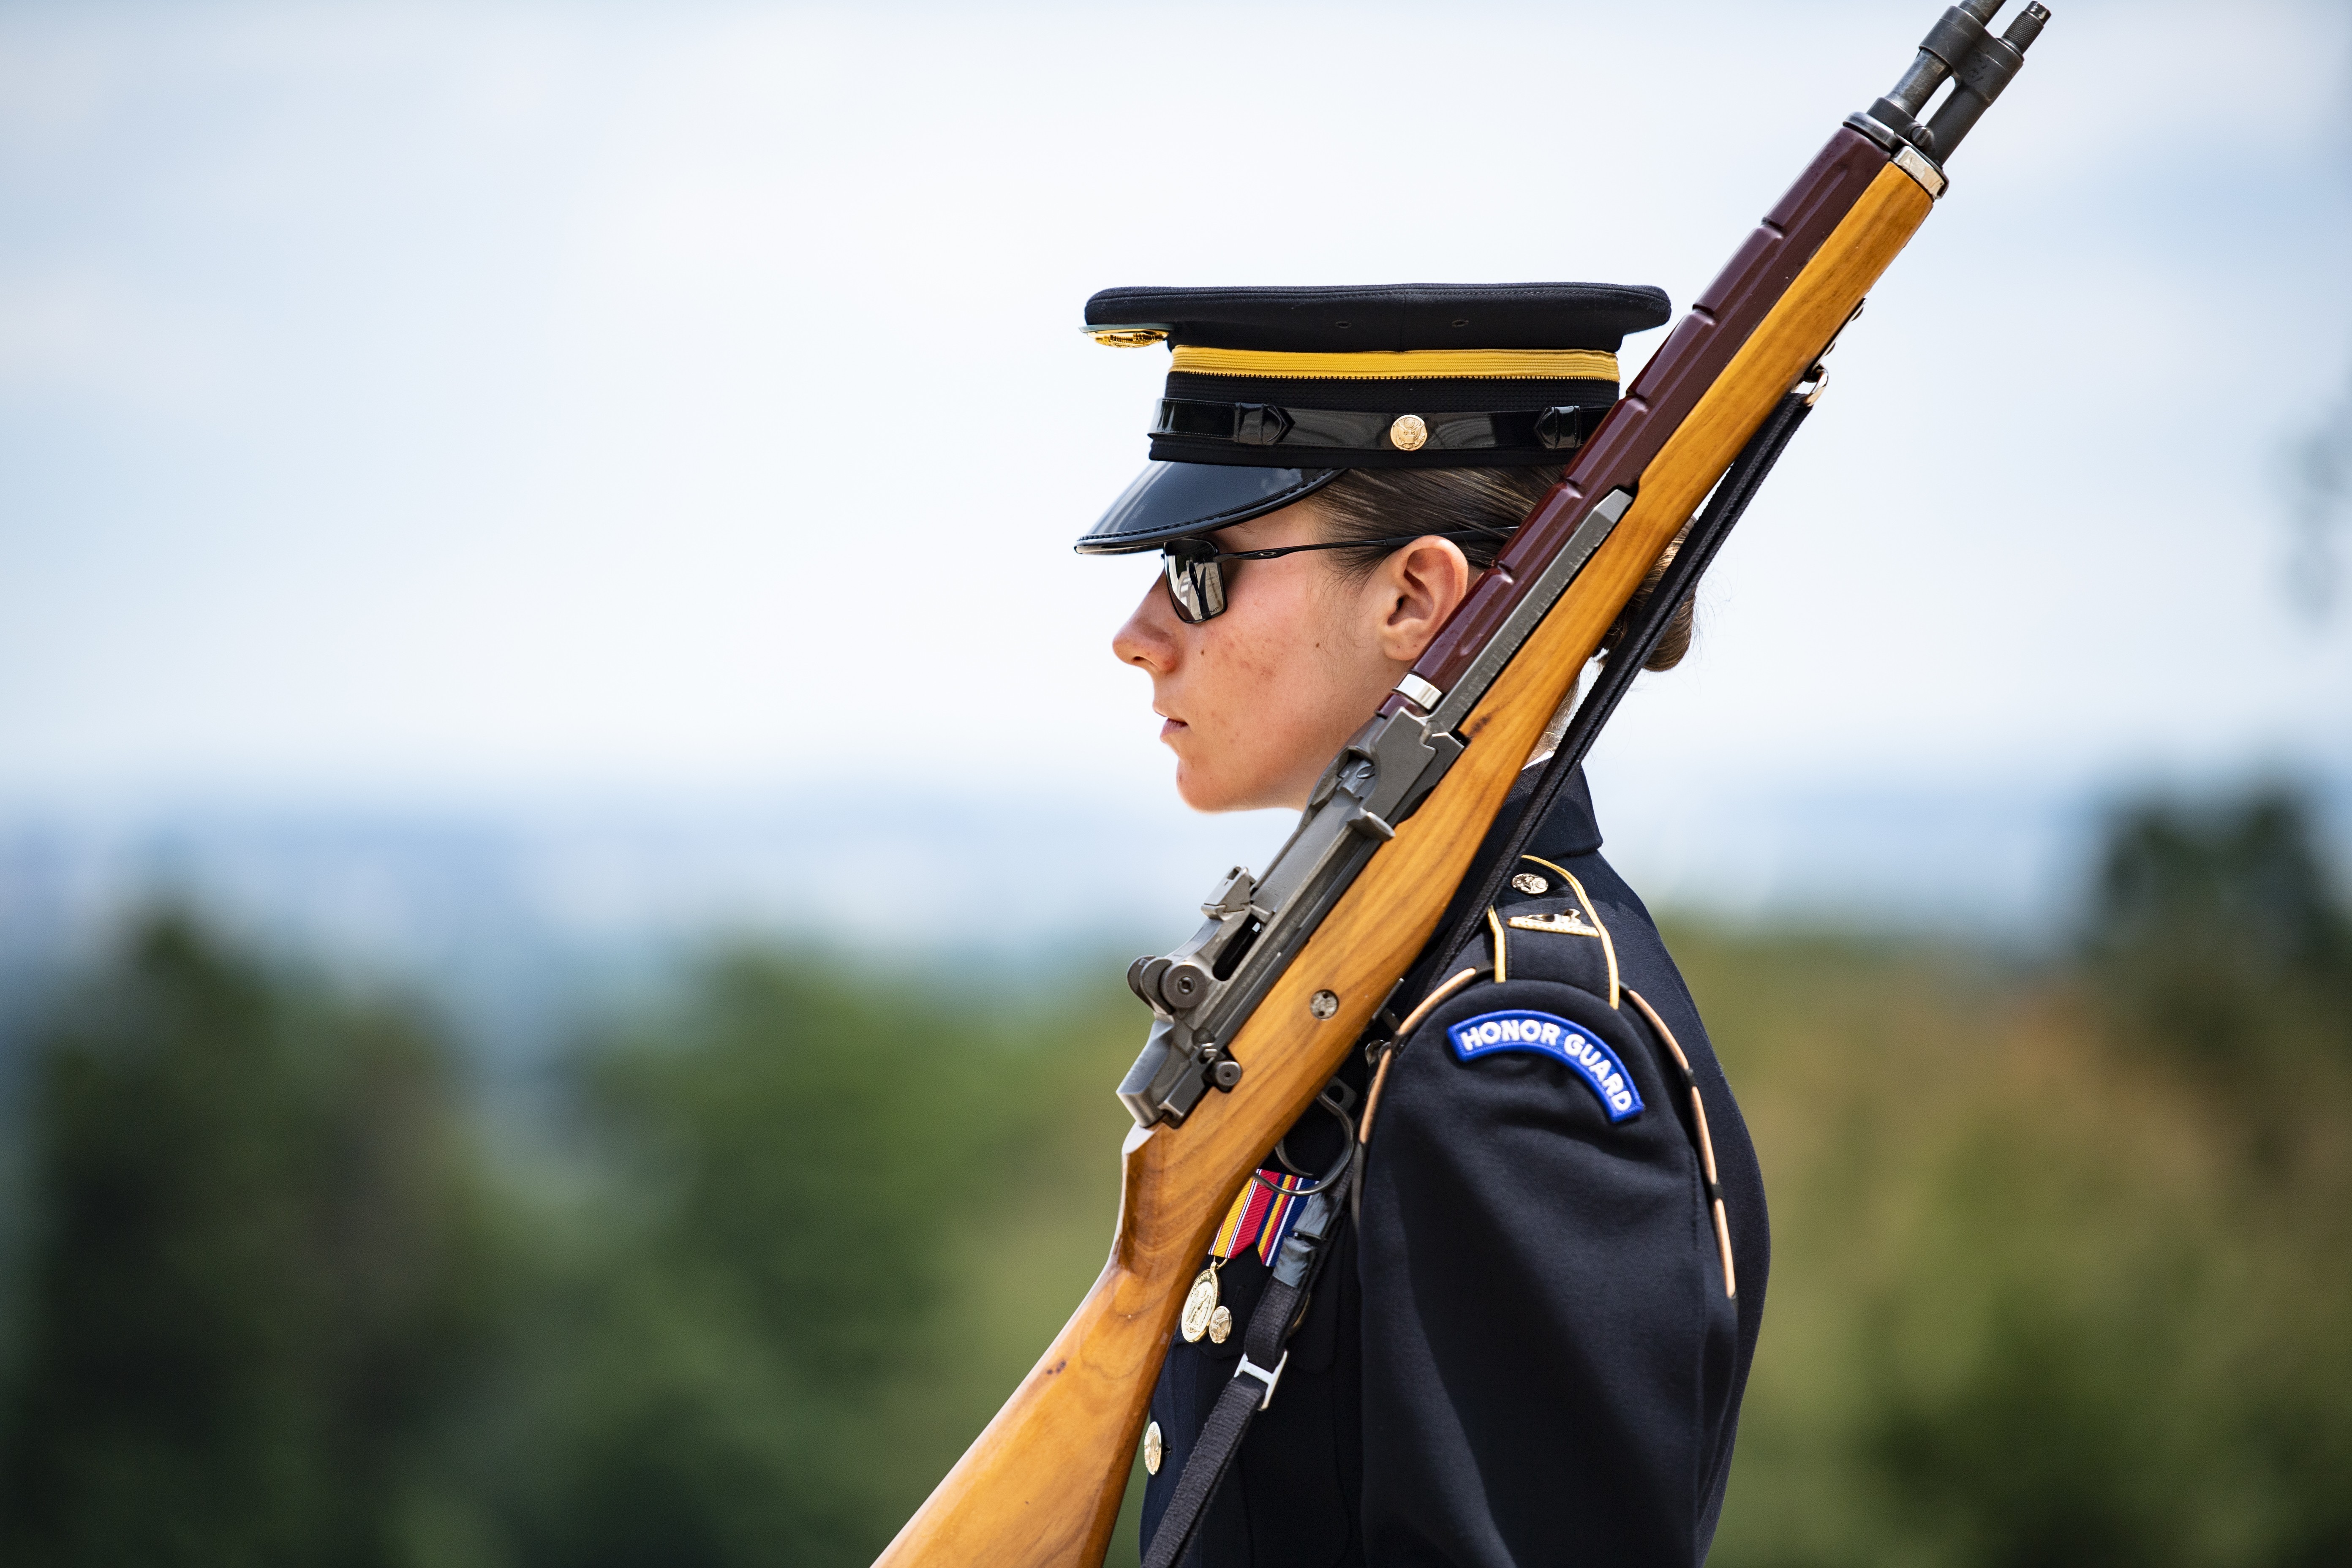 Guarding the Tomb of the Unknown Soldier, Article